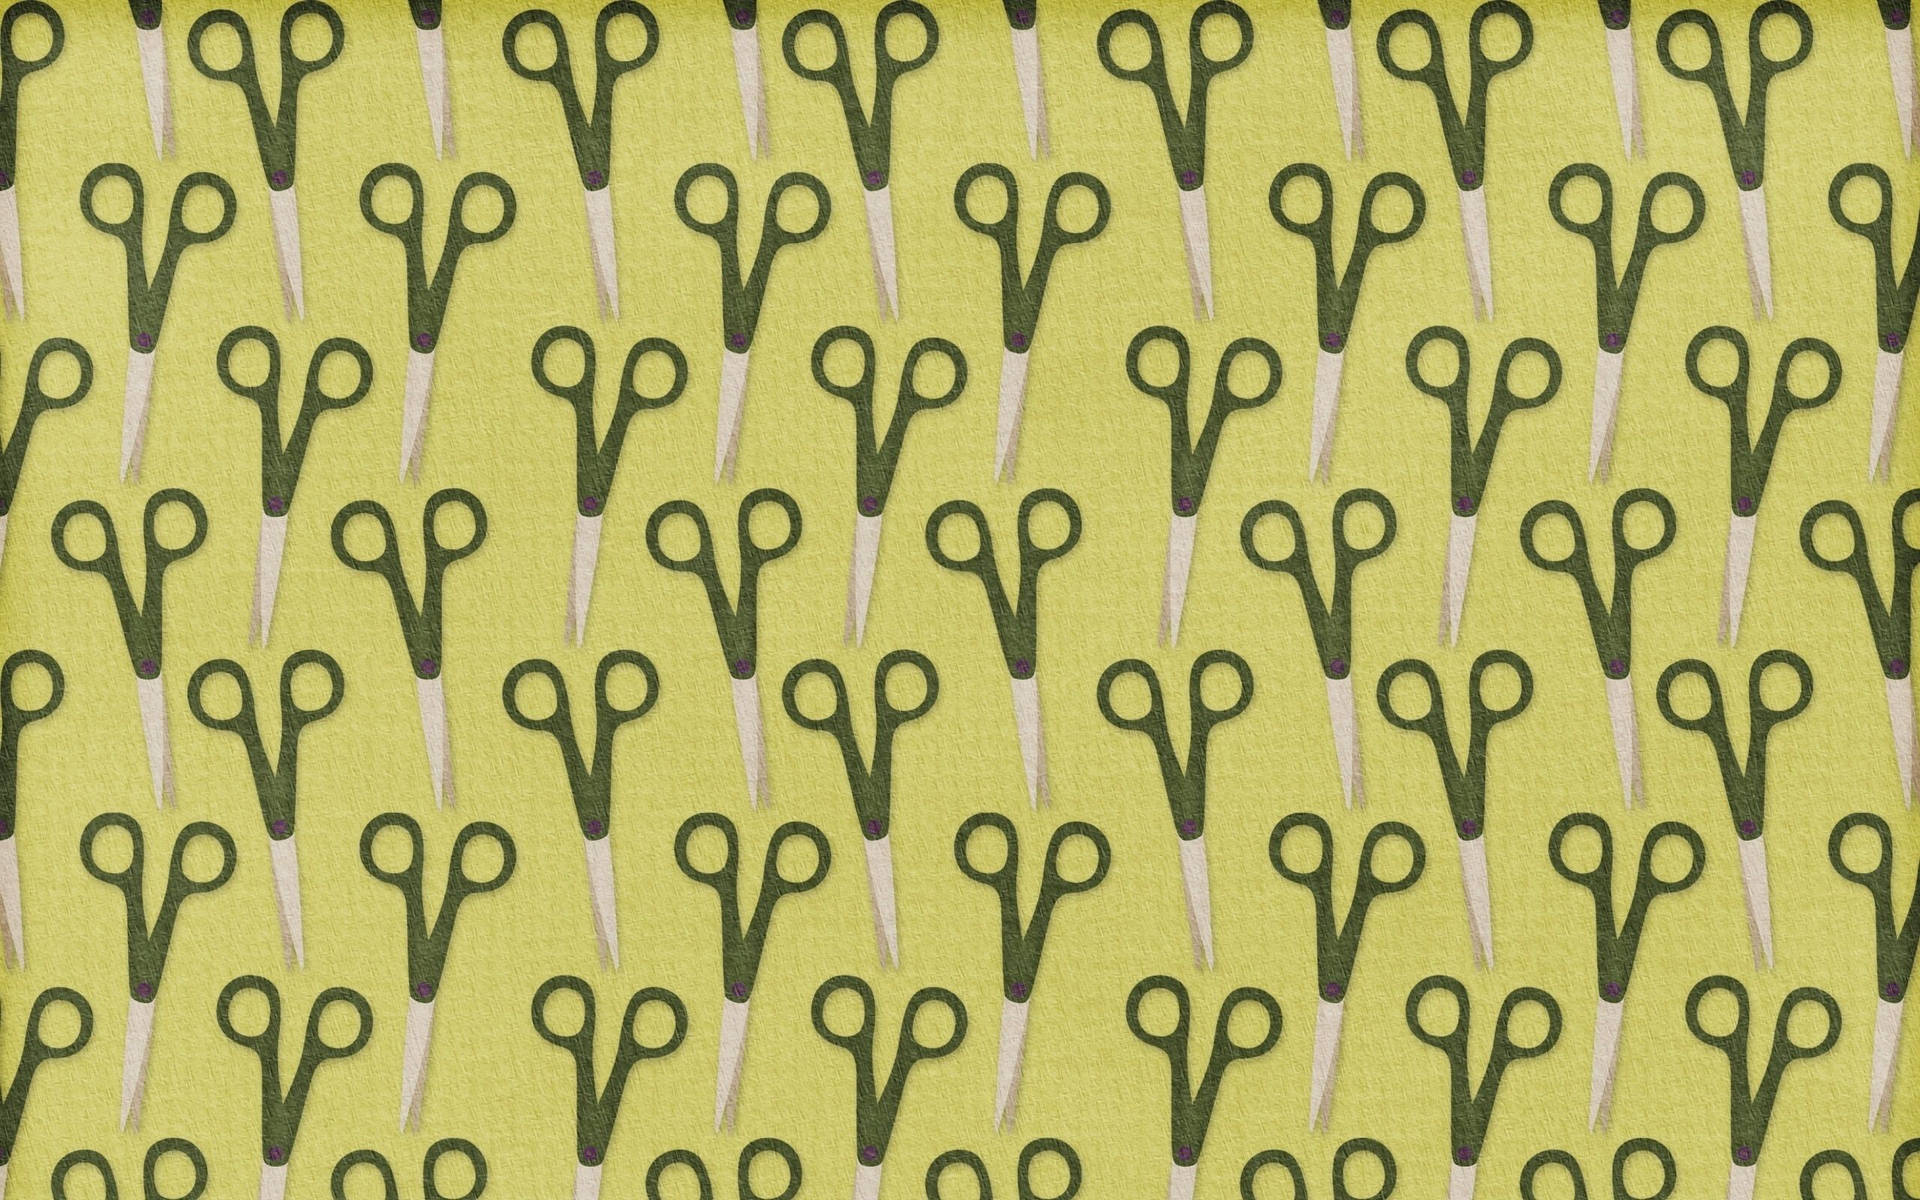 Image  Scissors On A Green Patterned Background Wallpaper